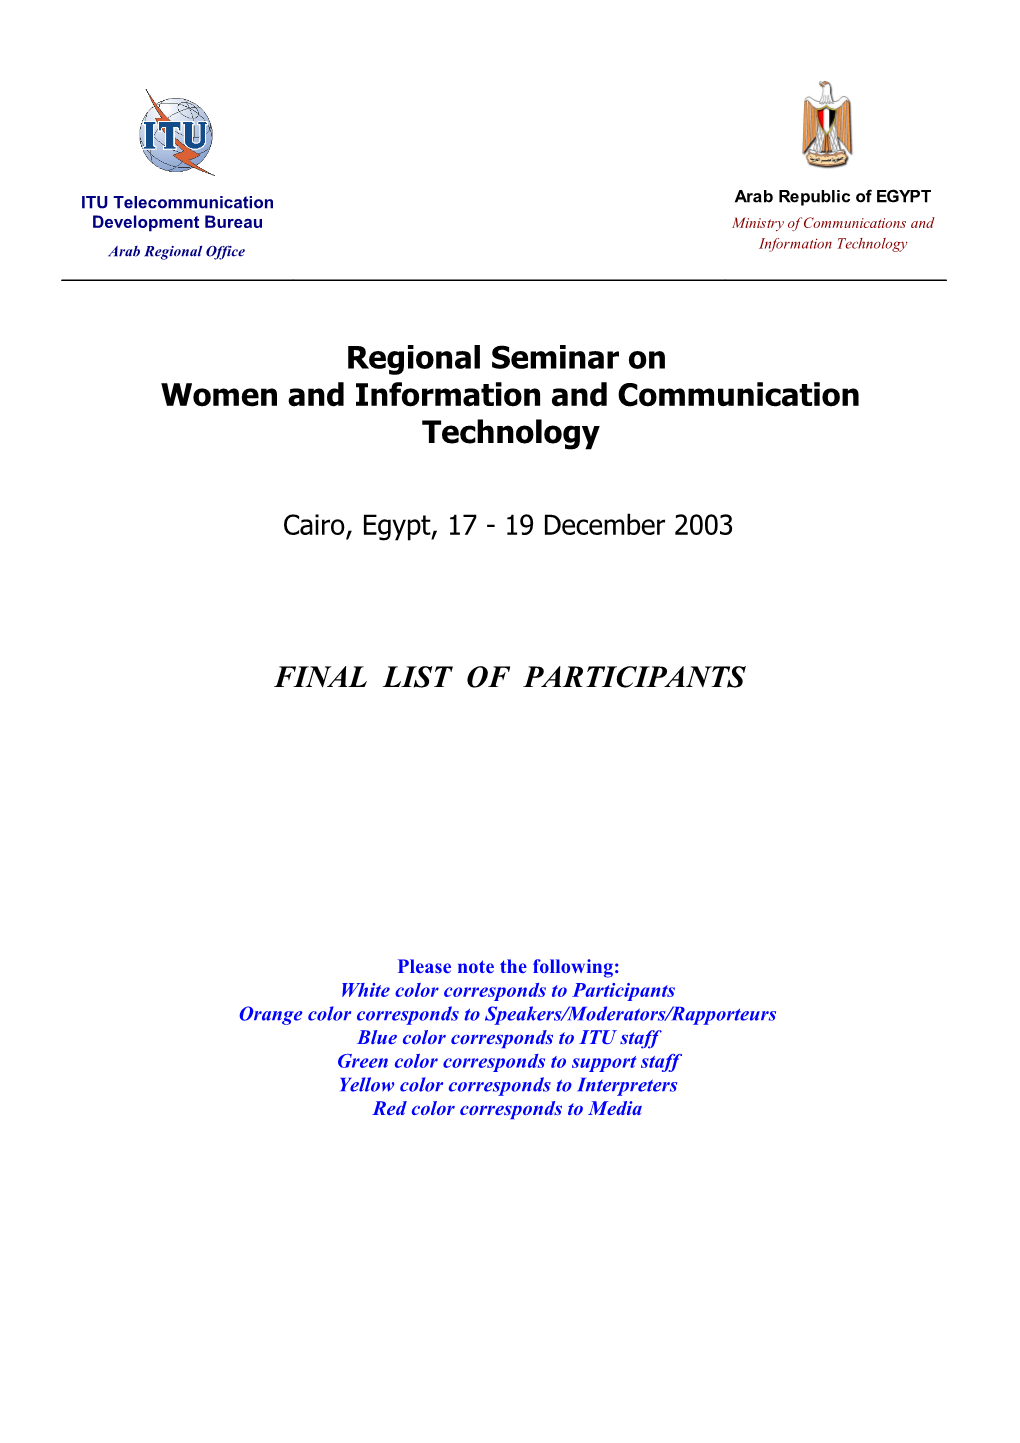 Women and Information and Communication Technology